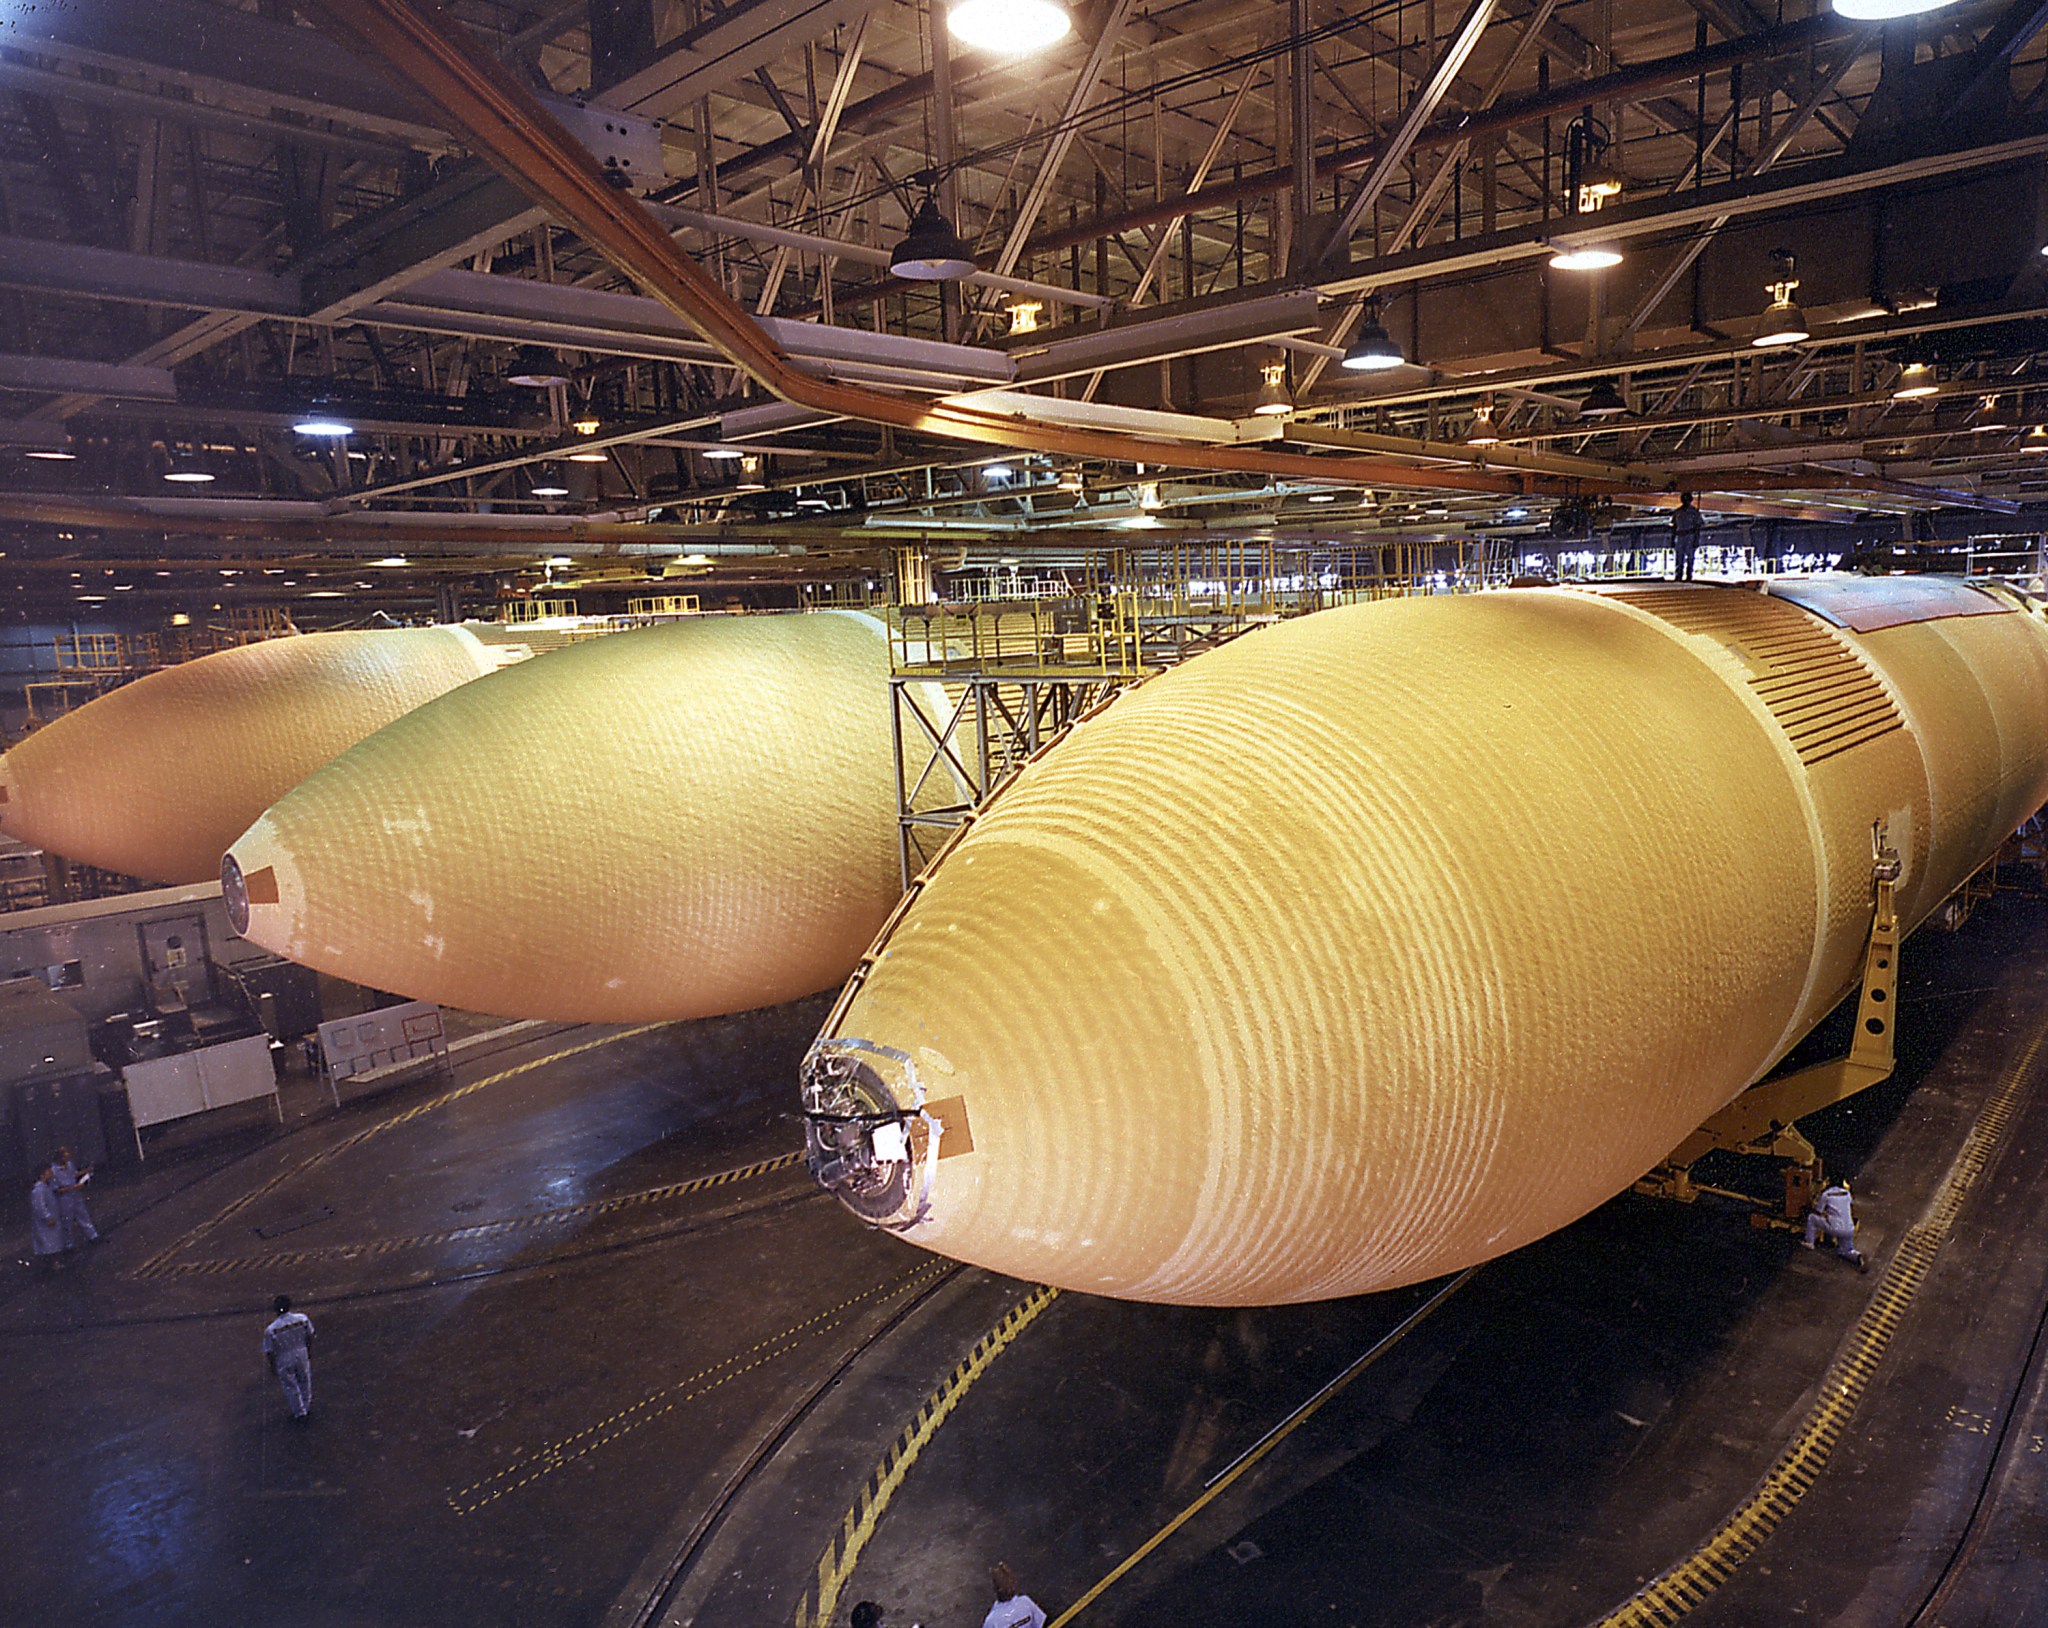 Three External Tanks from the Space Shuttle programs at the Michoud Assembly Facility. The giant cylinder, higher than a 15-story building, with a length of 154-feet (47-meters) and a diameter of 27.5-feet (8.4-meters), is the largest single piece of the Space Shuttle. 